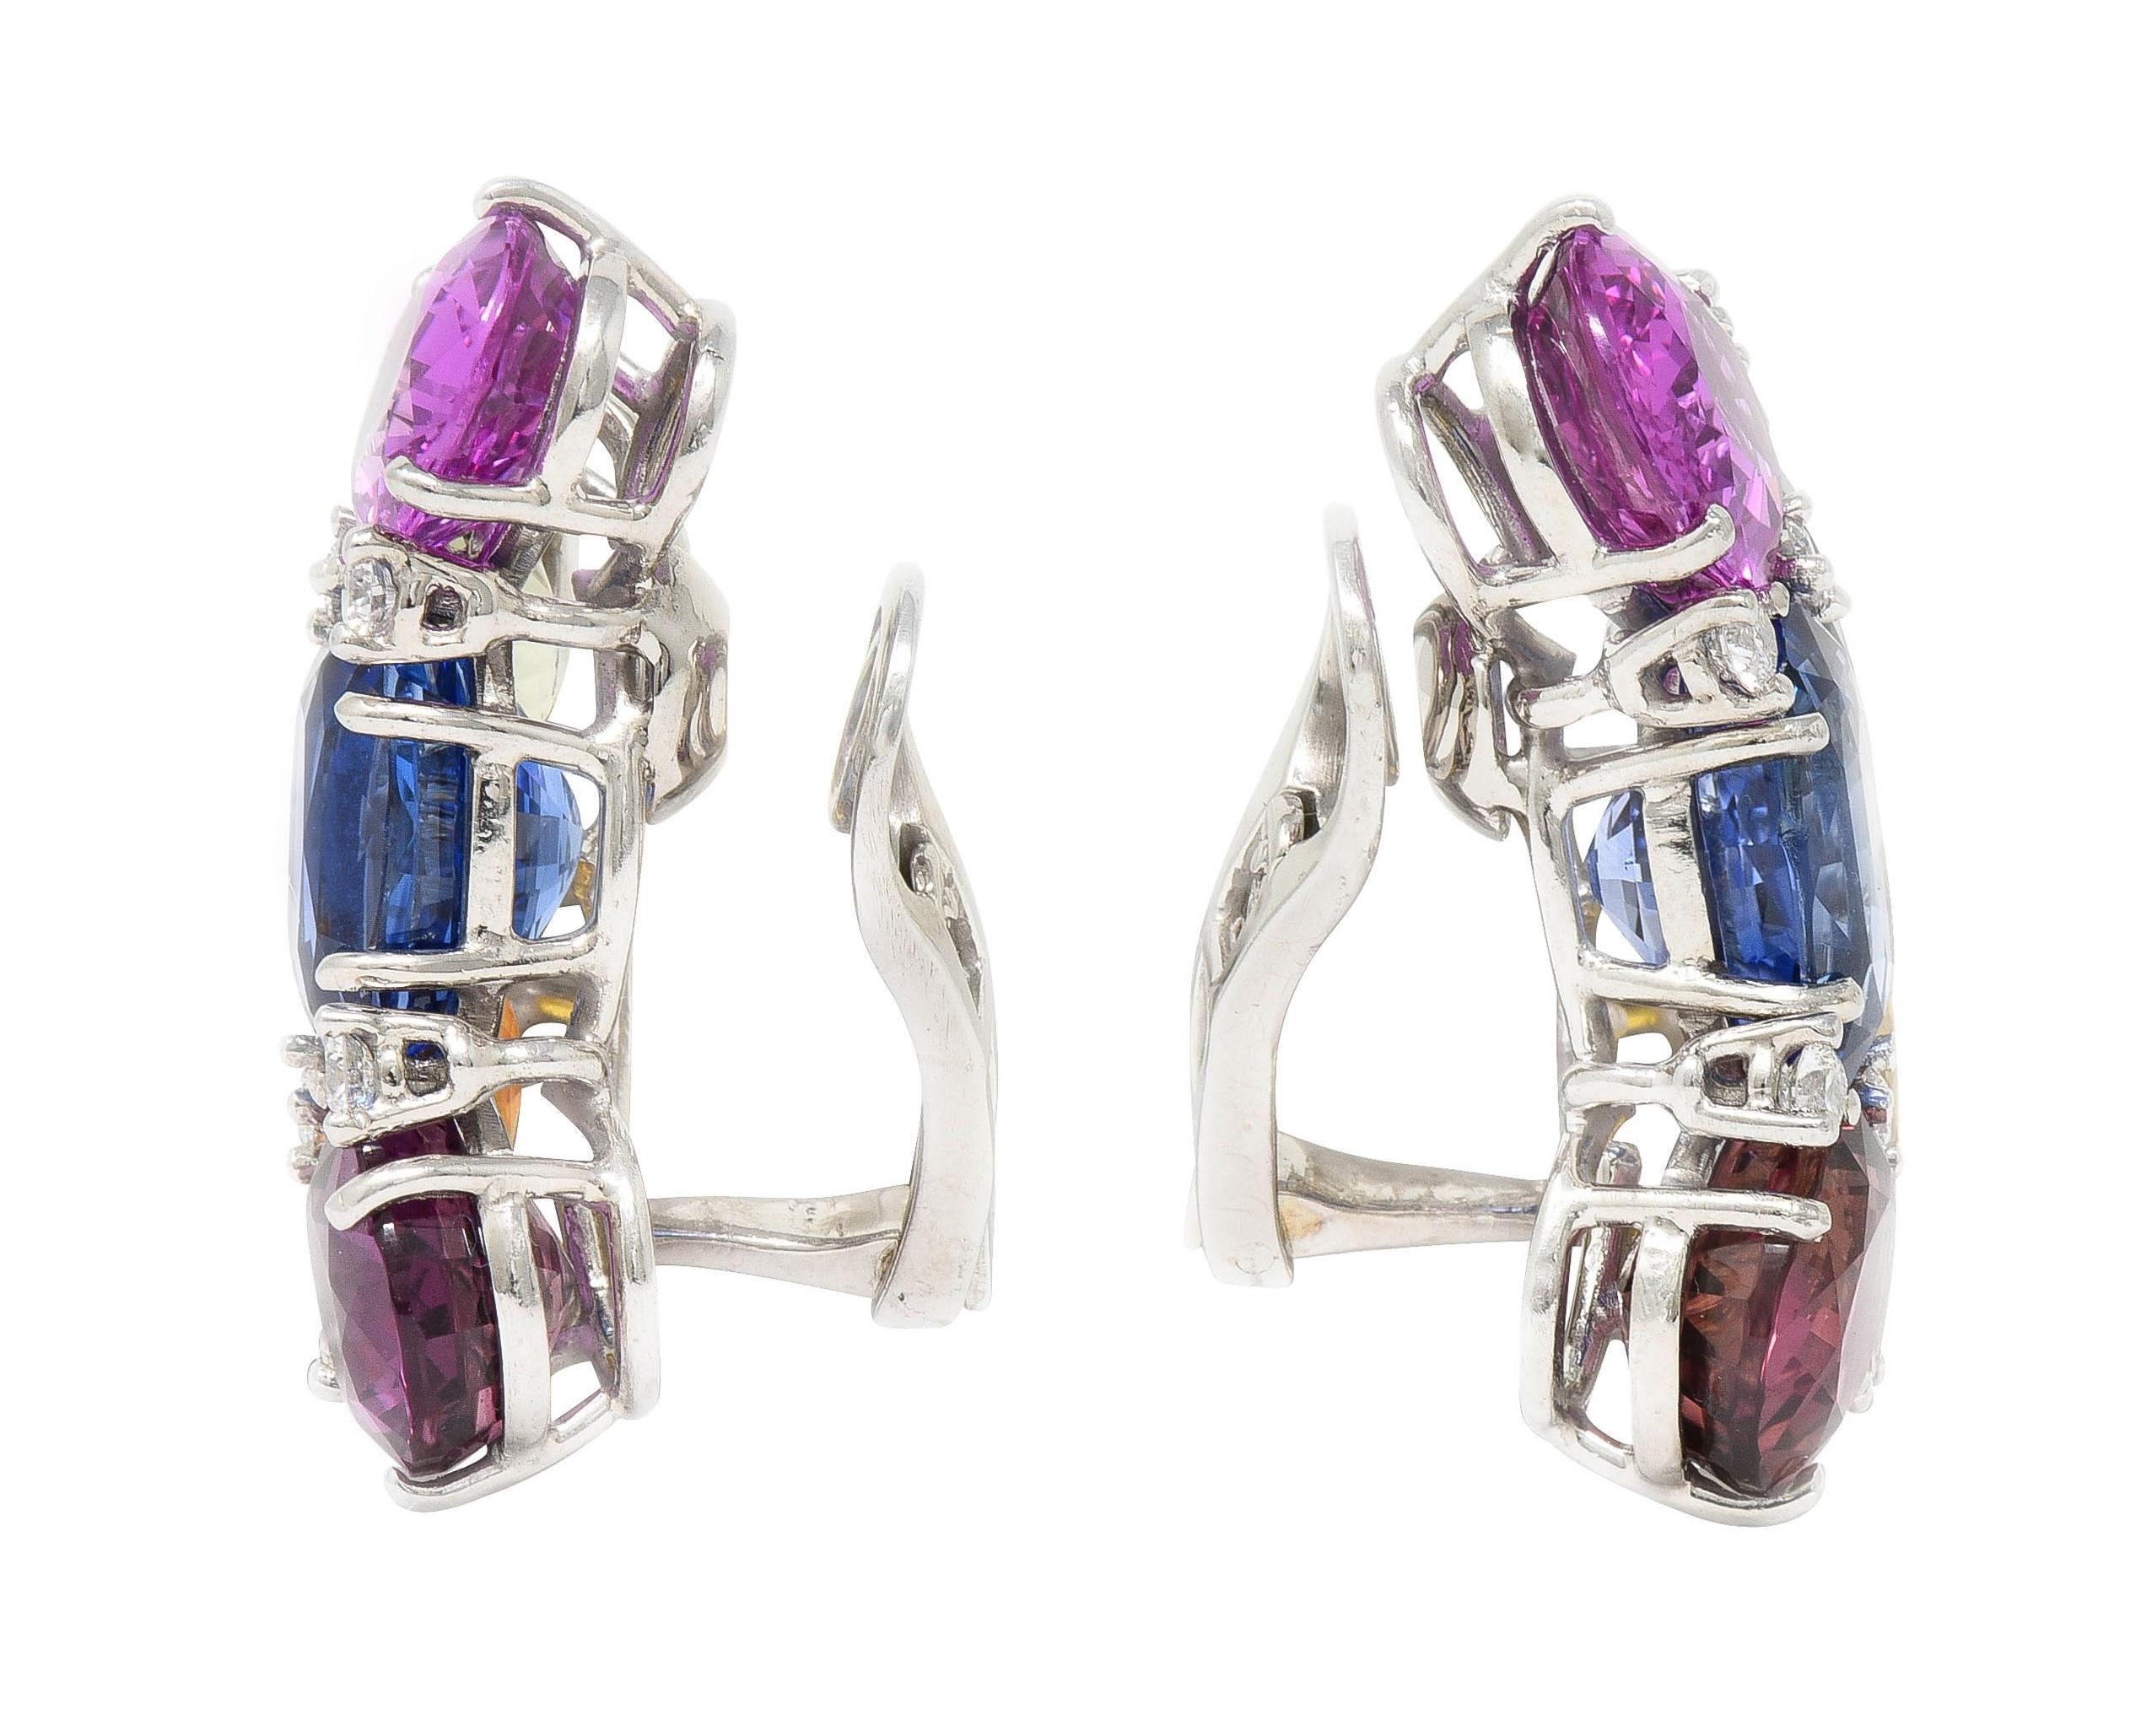 Designed as abstract clusters of oval cut sapphires weighing approximately 38.90 carats total
Transparent medium blue, magenta, orangey yellow, pink, and light green
Prong set in wire baskets and accented by round brilliant cut diamonds